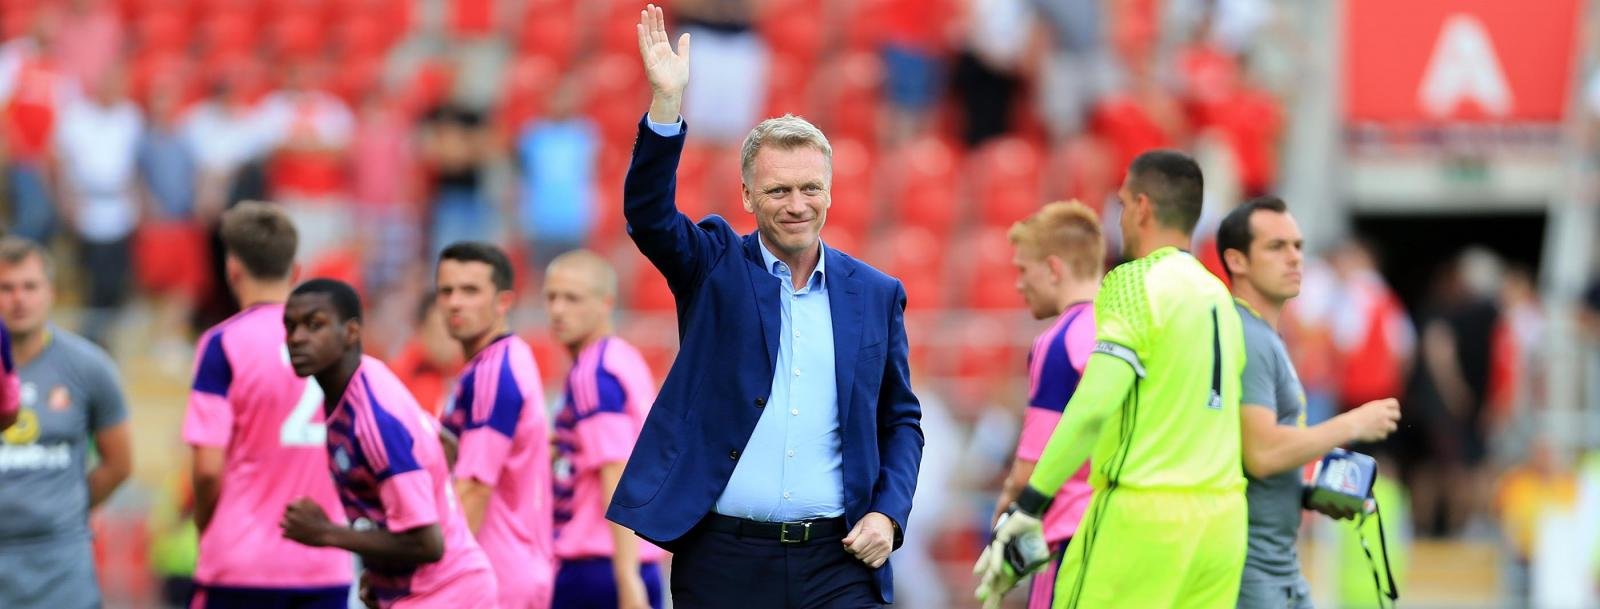 Can Sunderland’s signings boost them up the Premier League table?